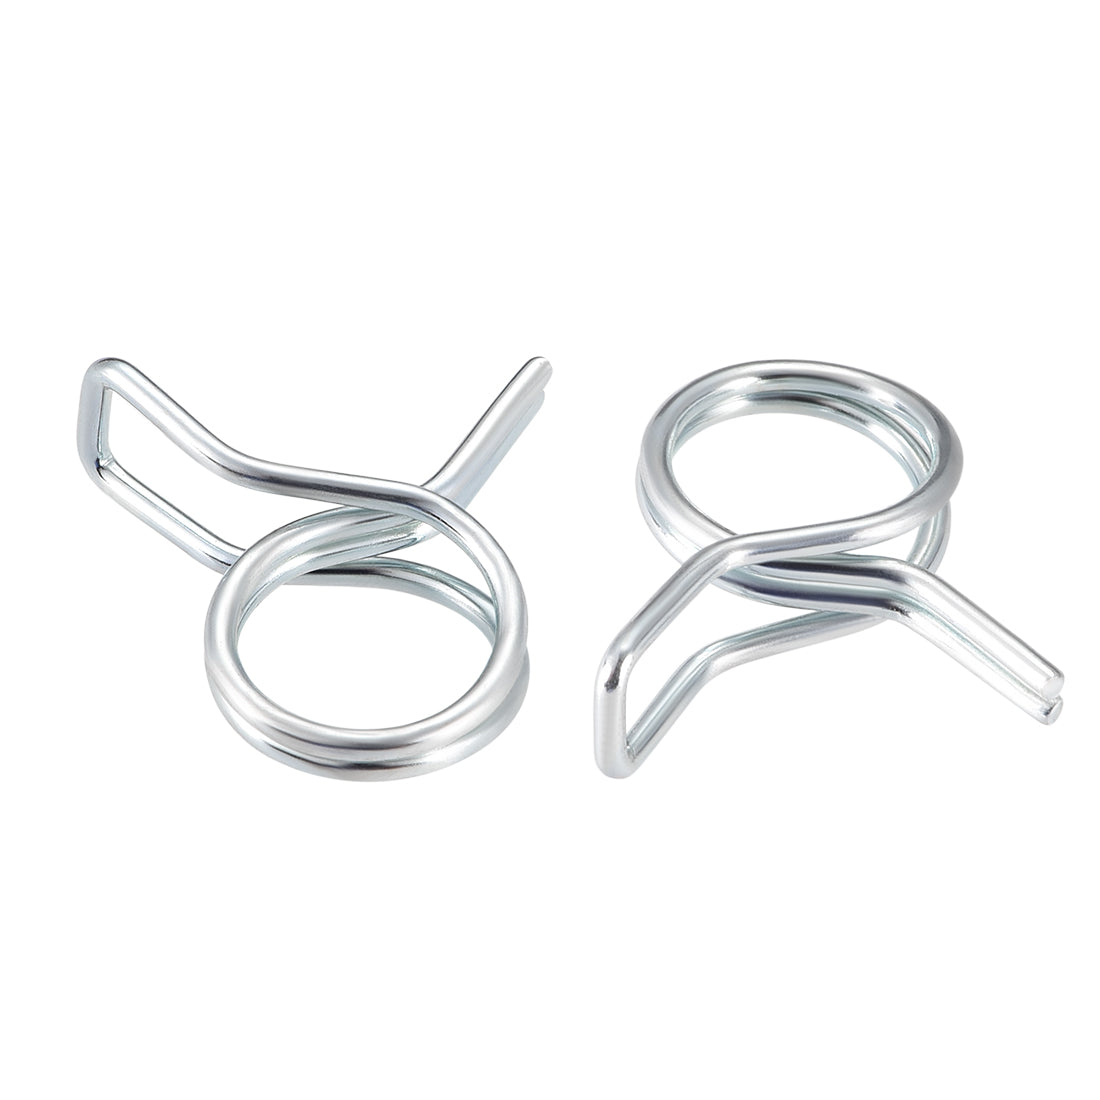 Uxcell Uxcell Double Wire Spring Hose Clamp 18mm Fuel Line Tube Spring Clips Zinc Plated 50Pcs